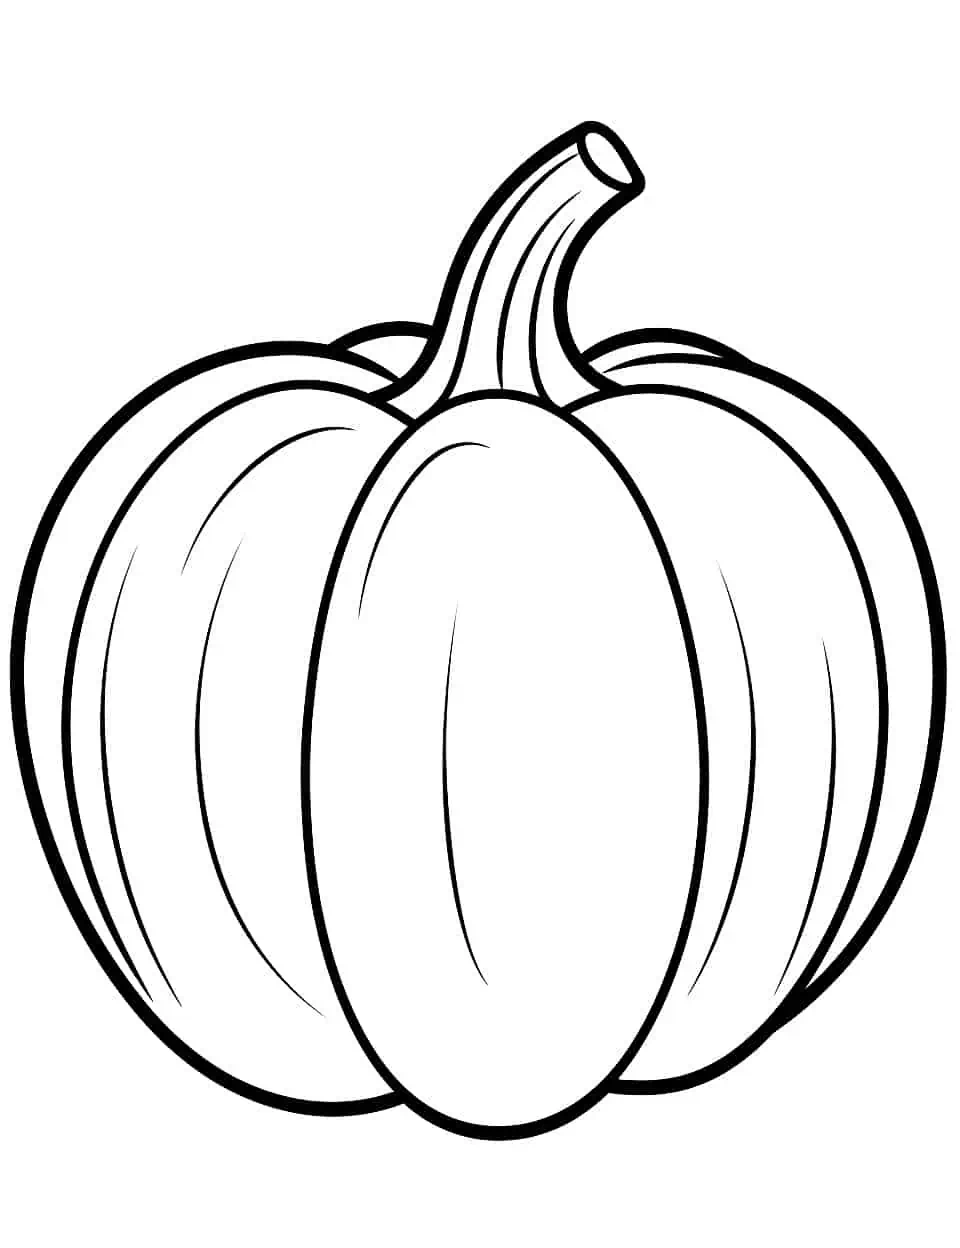 Simple Pumpkin Coloring Page - A large, simple pumpkin with a friendly smile. Perfect for beginners just starting to color.